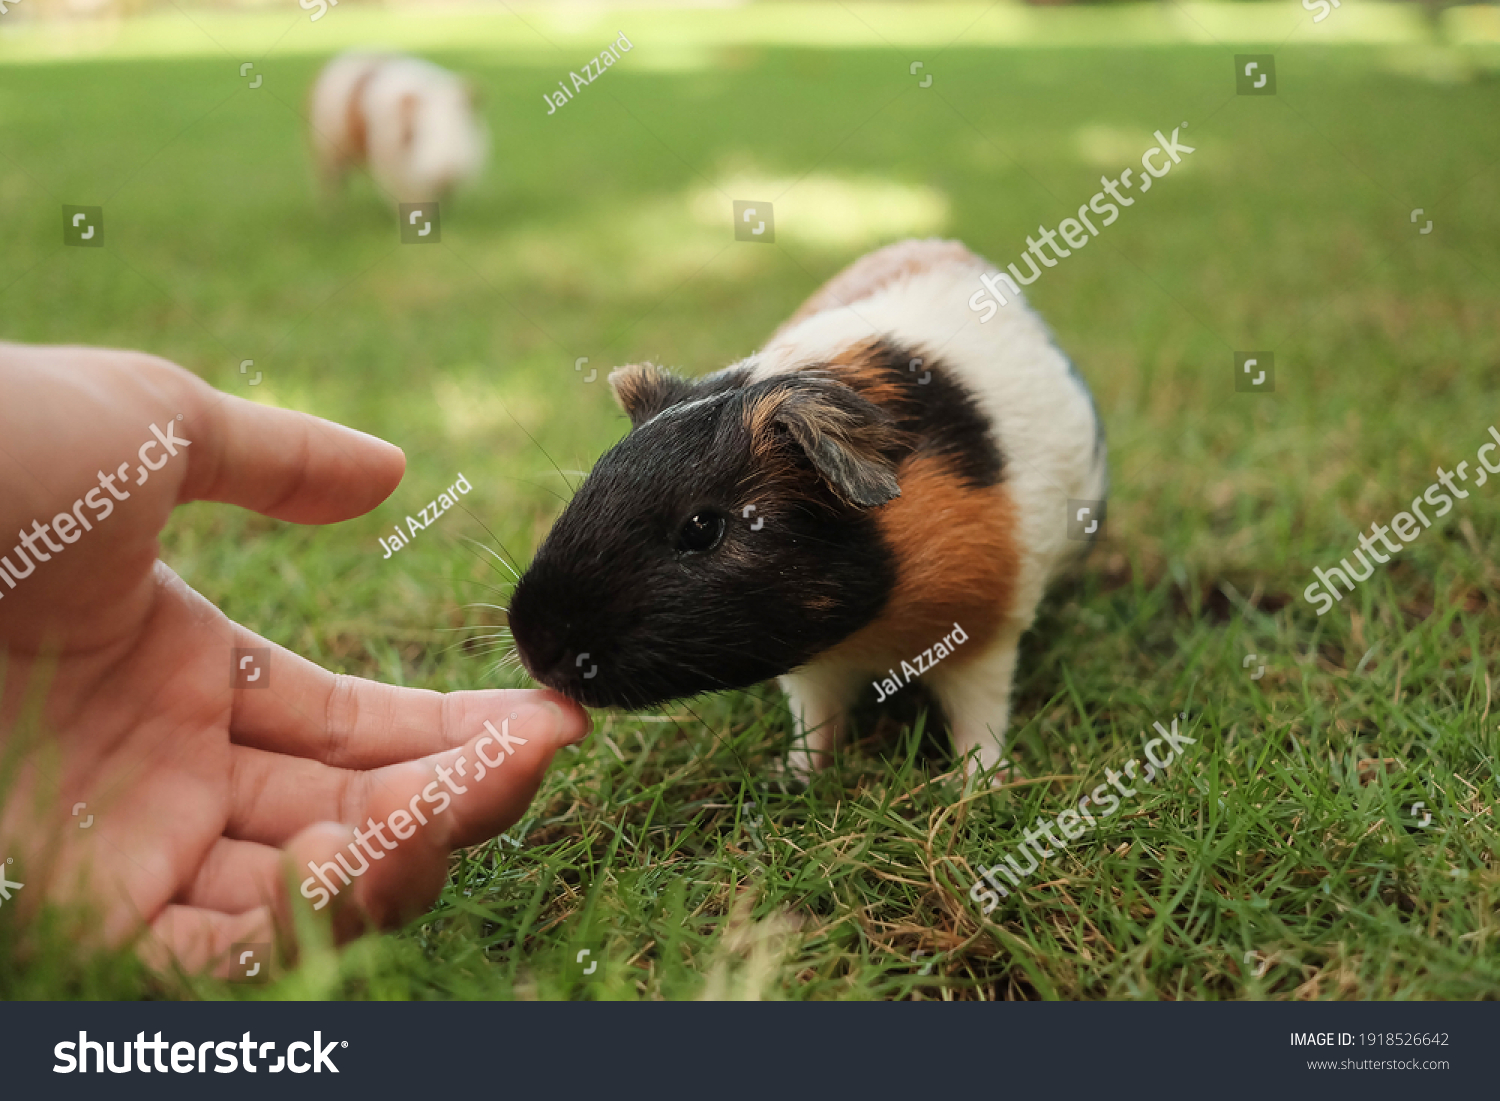 Pig Smell Hand Nature Blurred Stock Photo (Edit Now) 1918526642